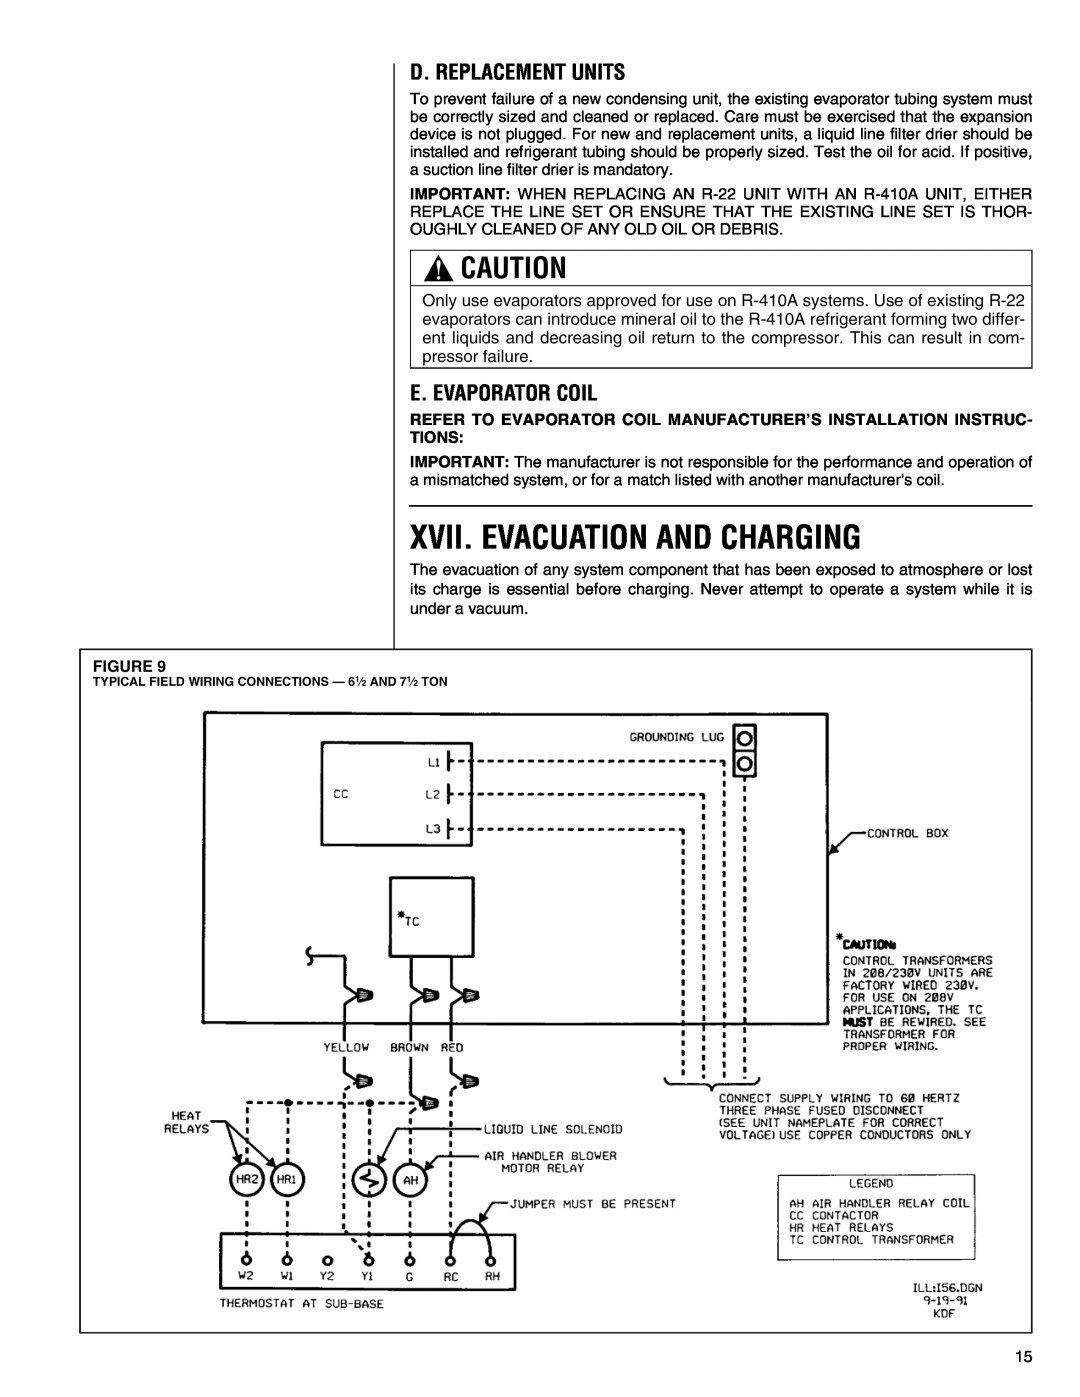 Heat Controller R-410A Xvii. Evacuation And Charging, D. Replacement Units, E. Evaporator Coil, Tions 